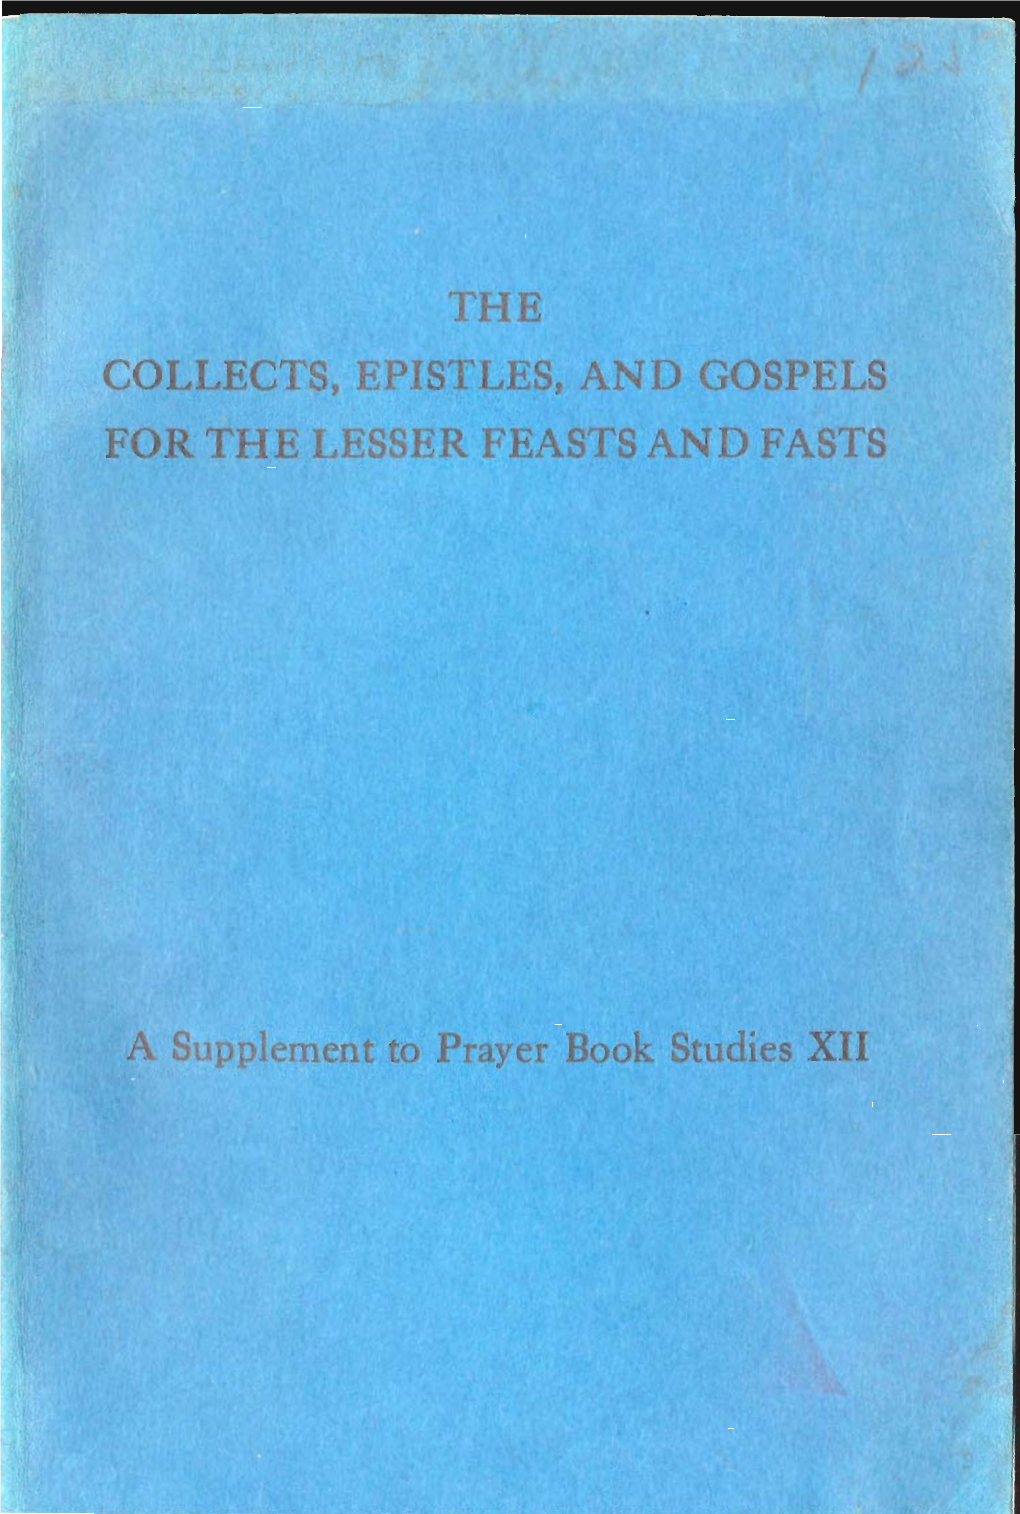 The Collects, Epistles, and Gospels for the Lesser Feasts and Fasts